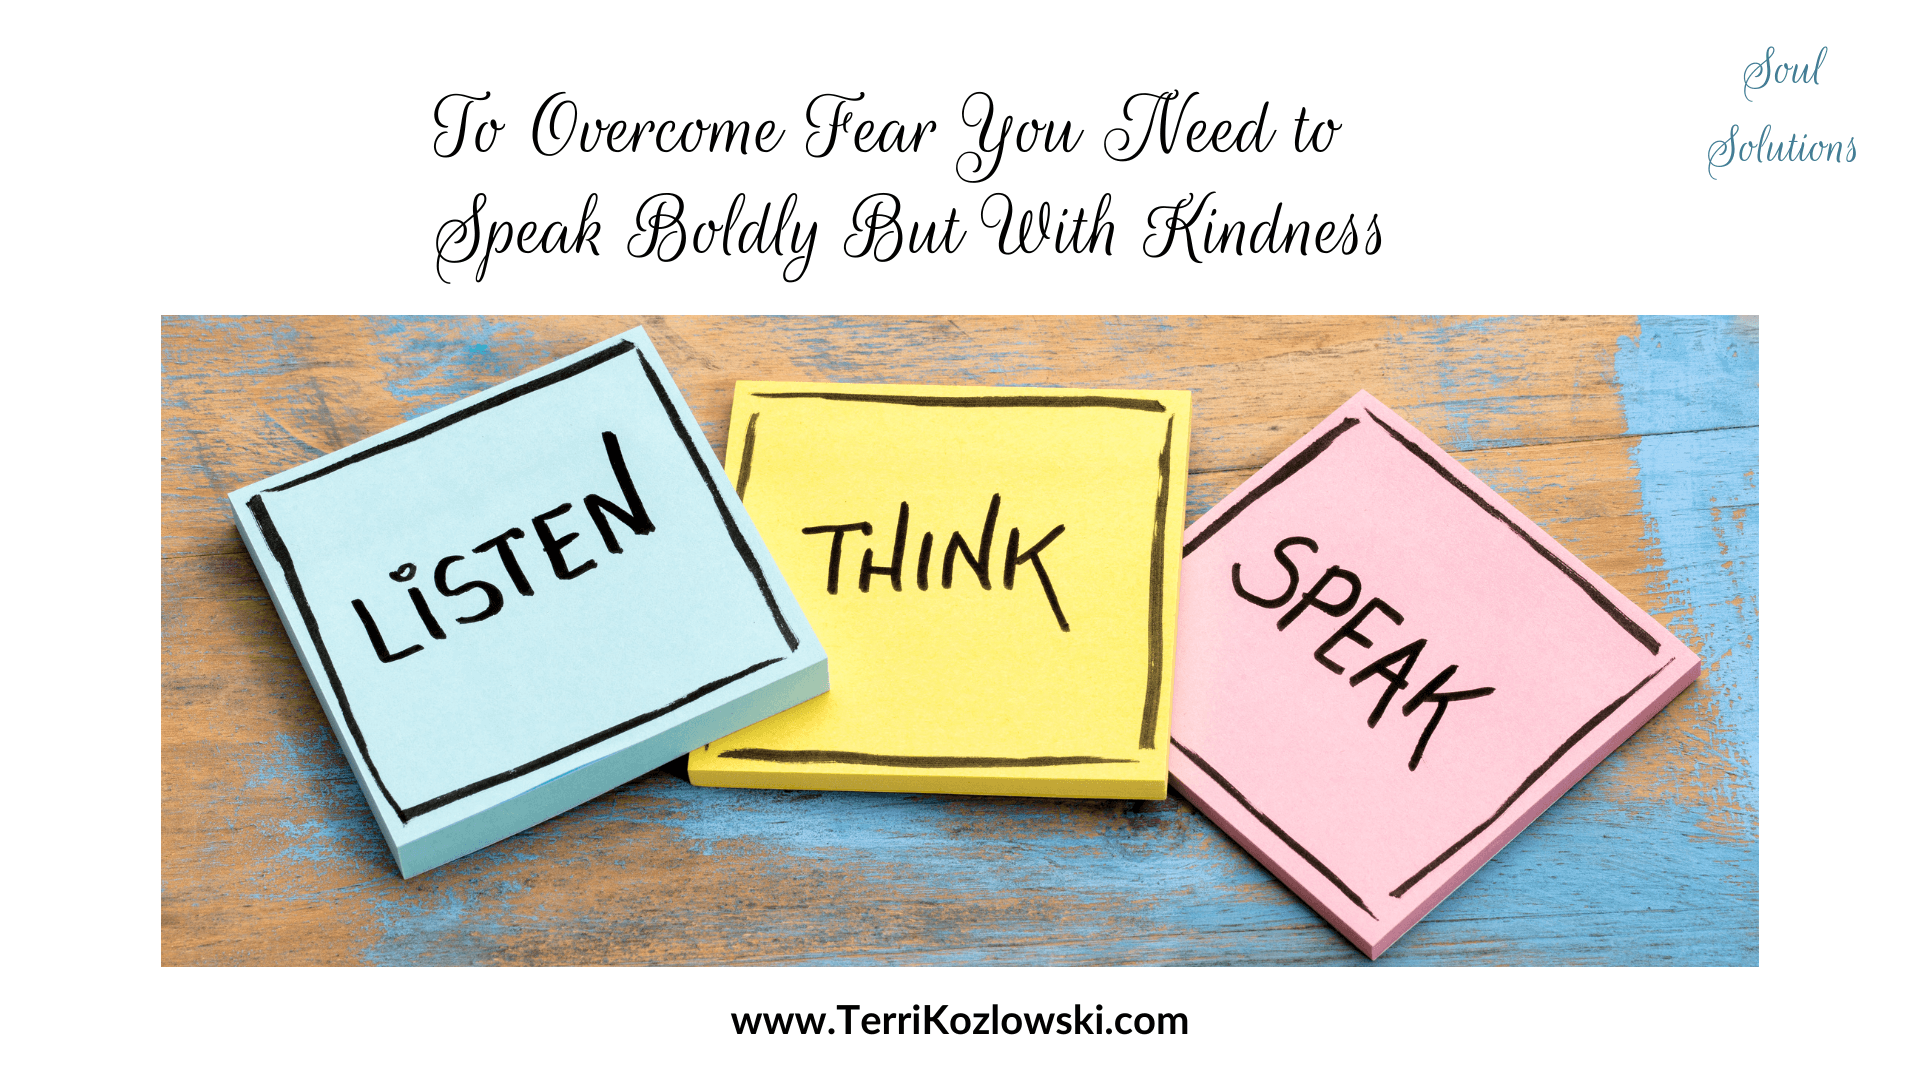 To Overcome Fear You Need to Speak Boldly But With Kindness